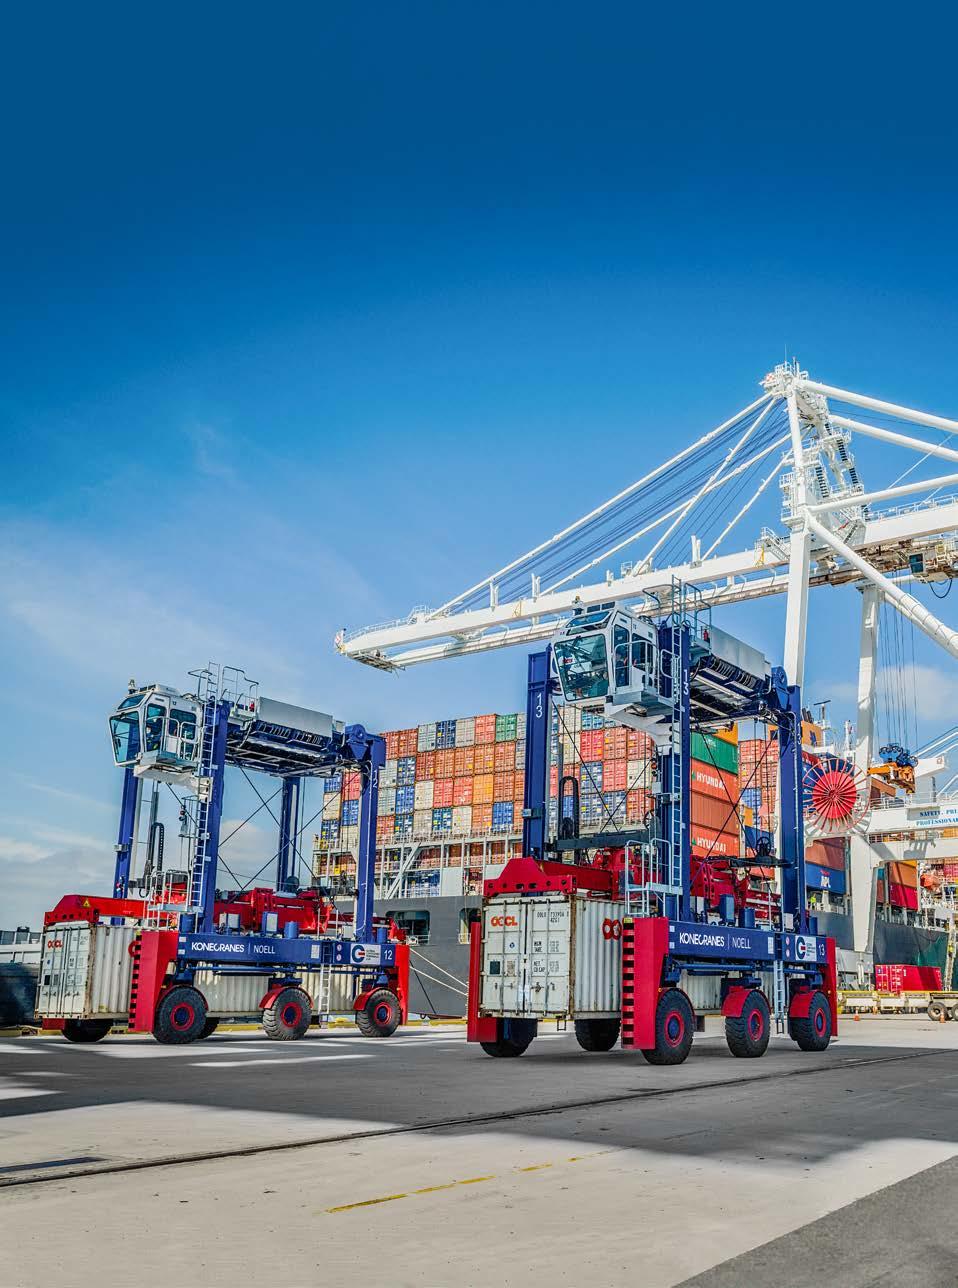 16 17 WITH THE KONECRANES NOELL FLEET MANAGEMENT SYSTEM OPERATION DATA ON-LINE MODULAR FLEET MANAGEMENT SYSTEM The operation and health status data of vehicles can be remotely monitored via the